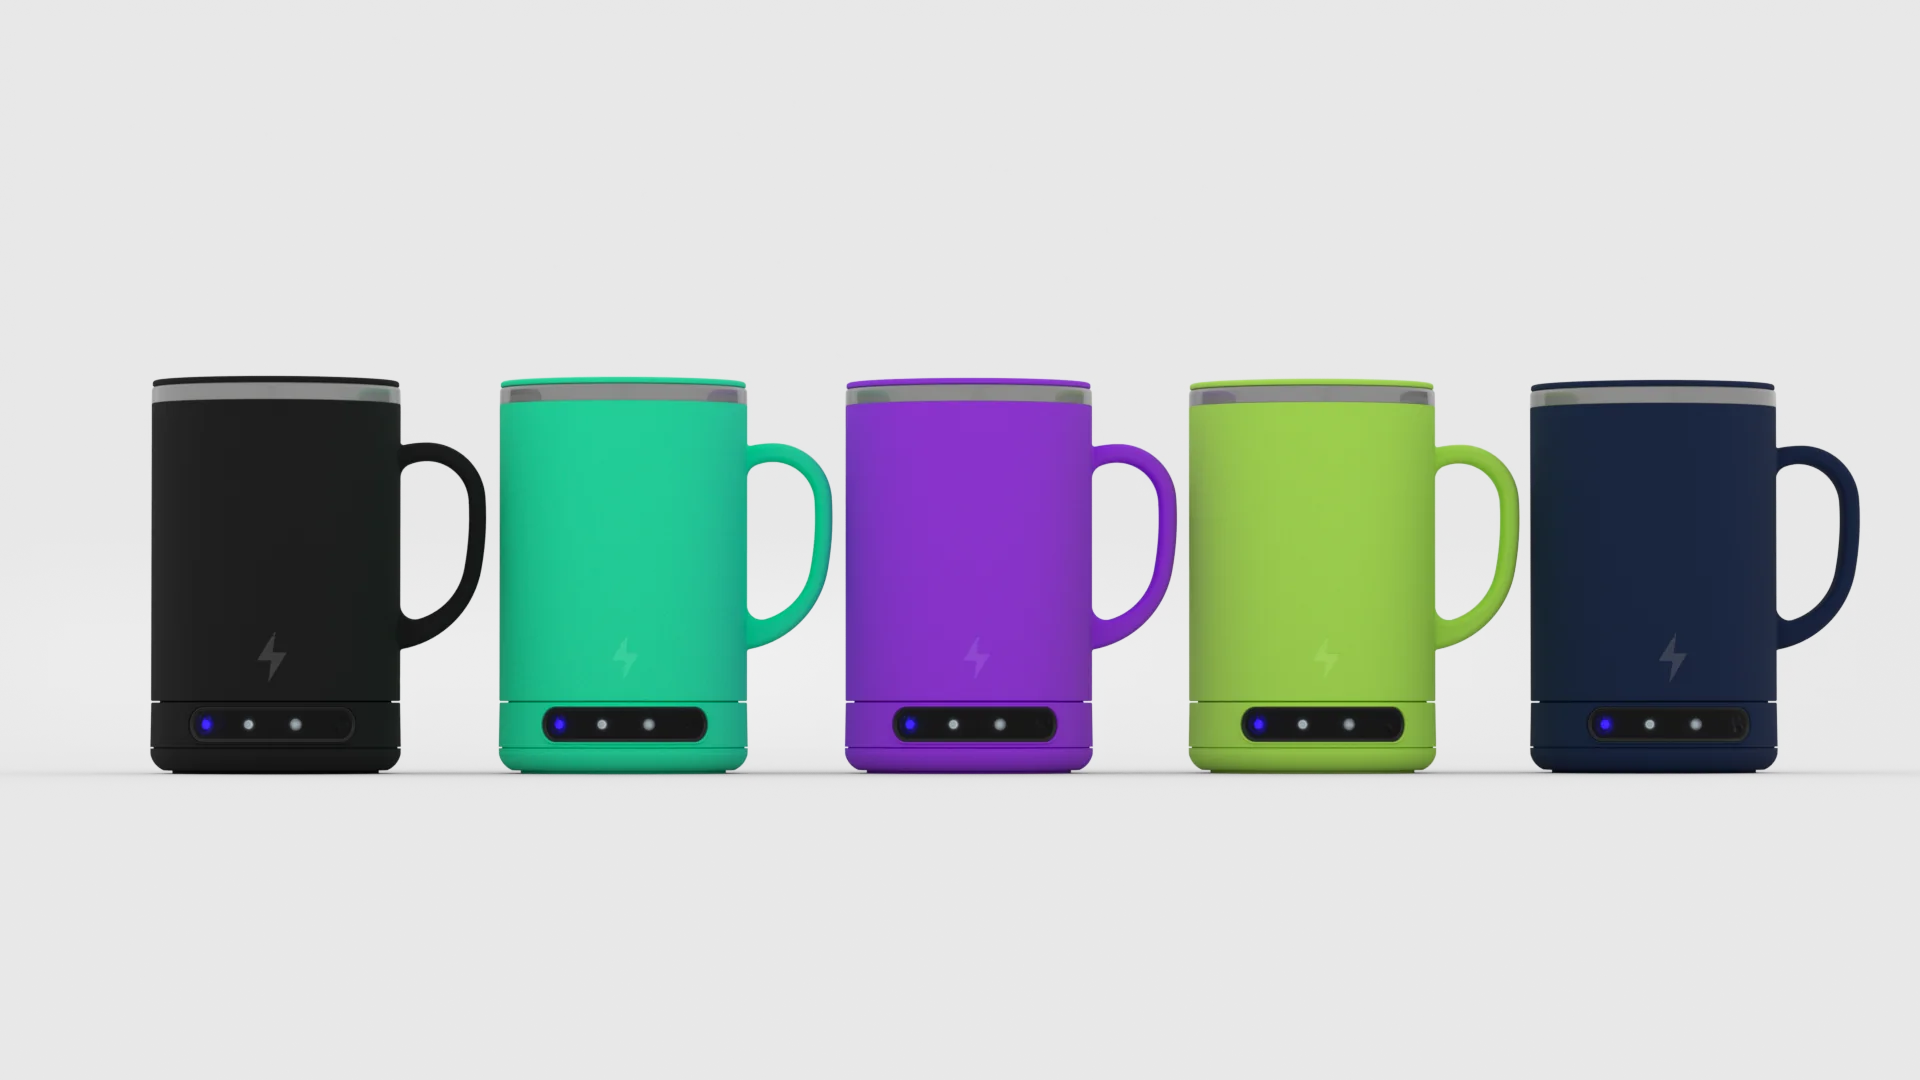 BOLT heated mug keeps your drink hot for over 4 hours - Geeky Gadgets